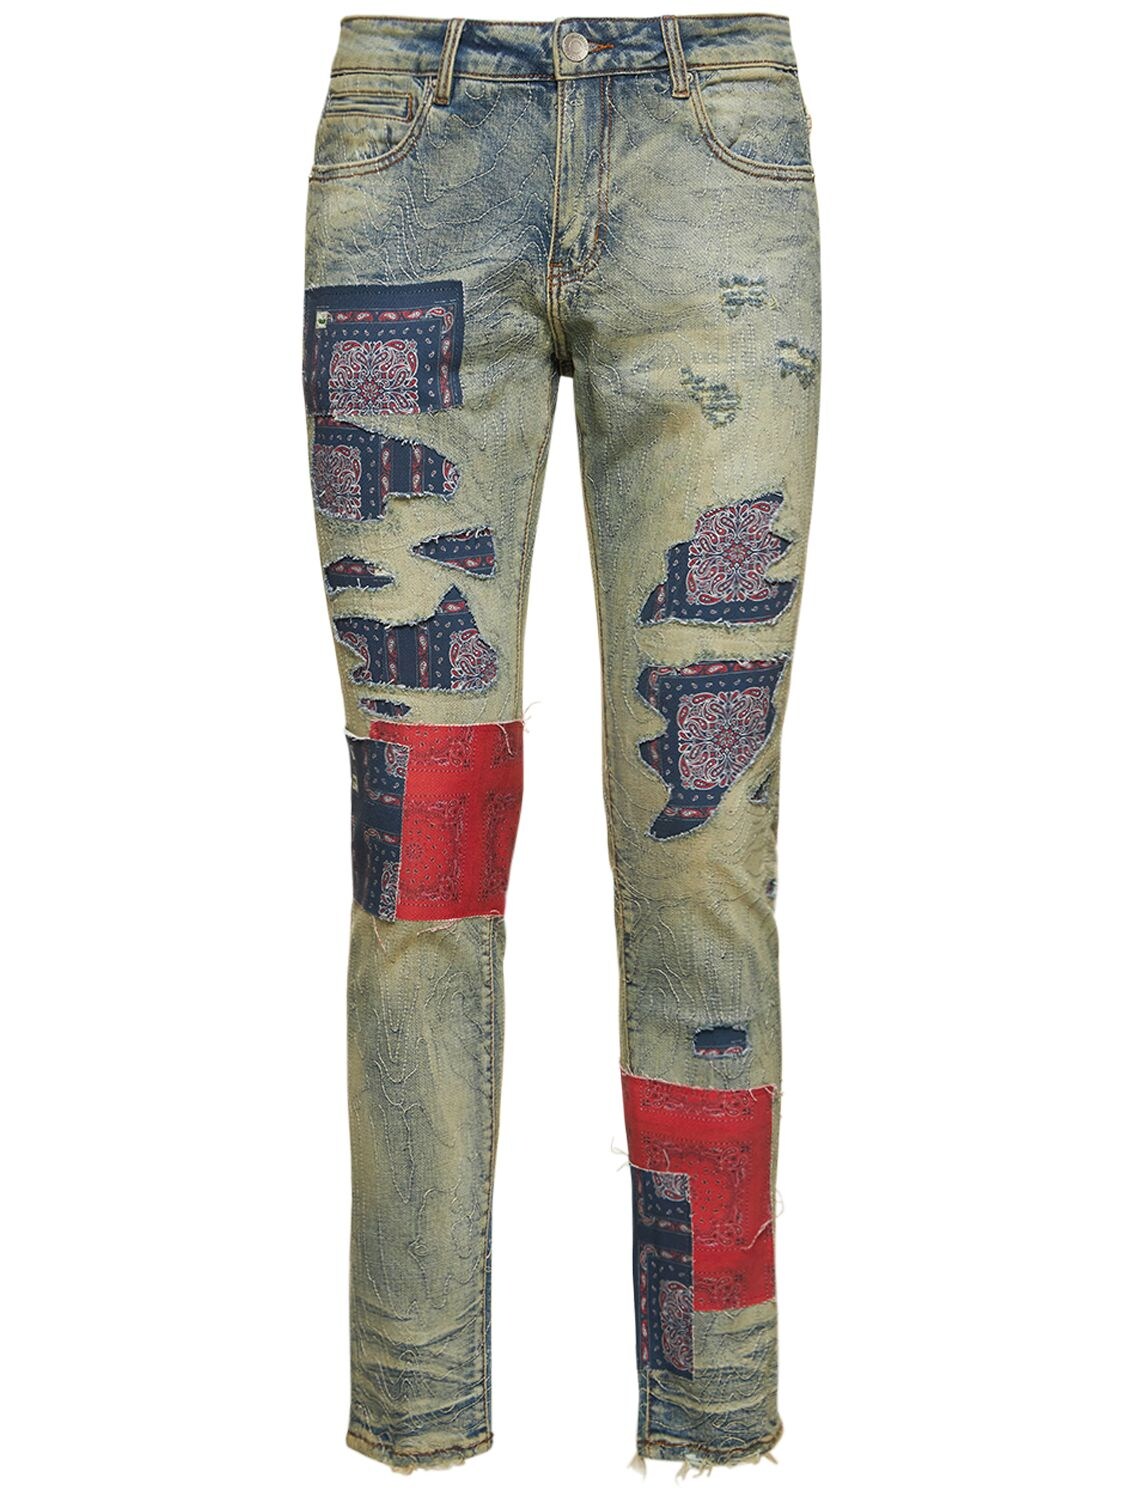 Distressed Denim Jeans with Bandana Paisley Patches